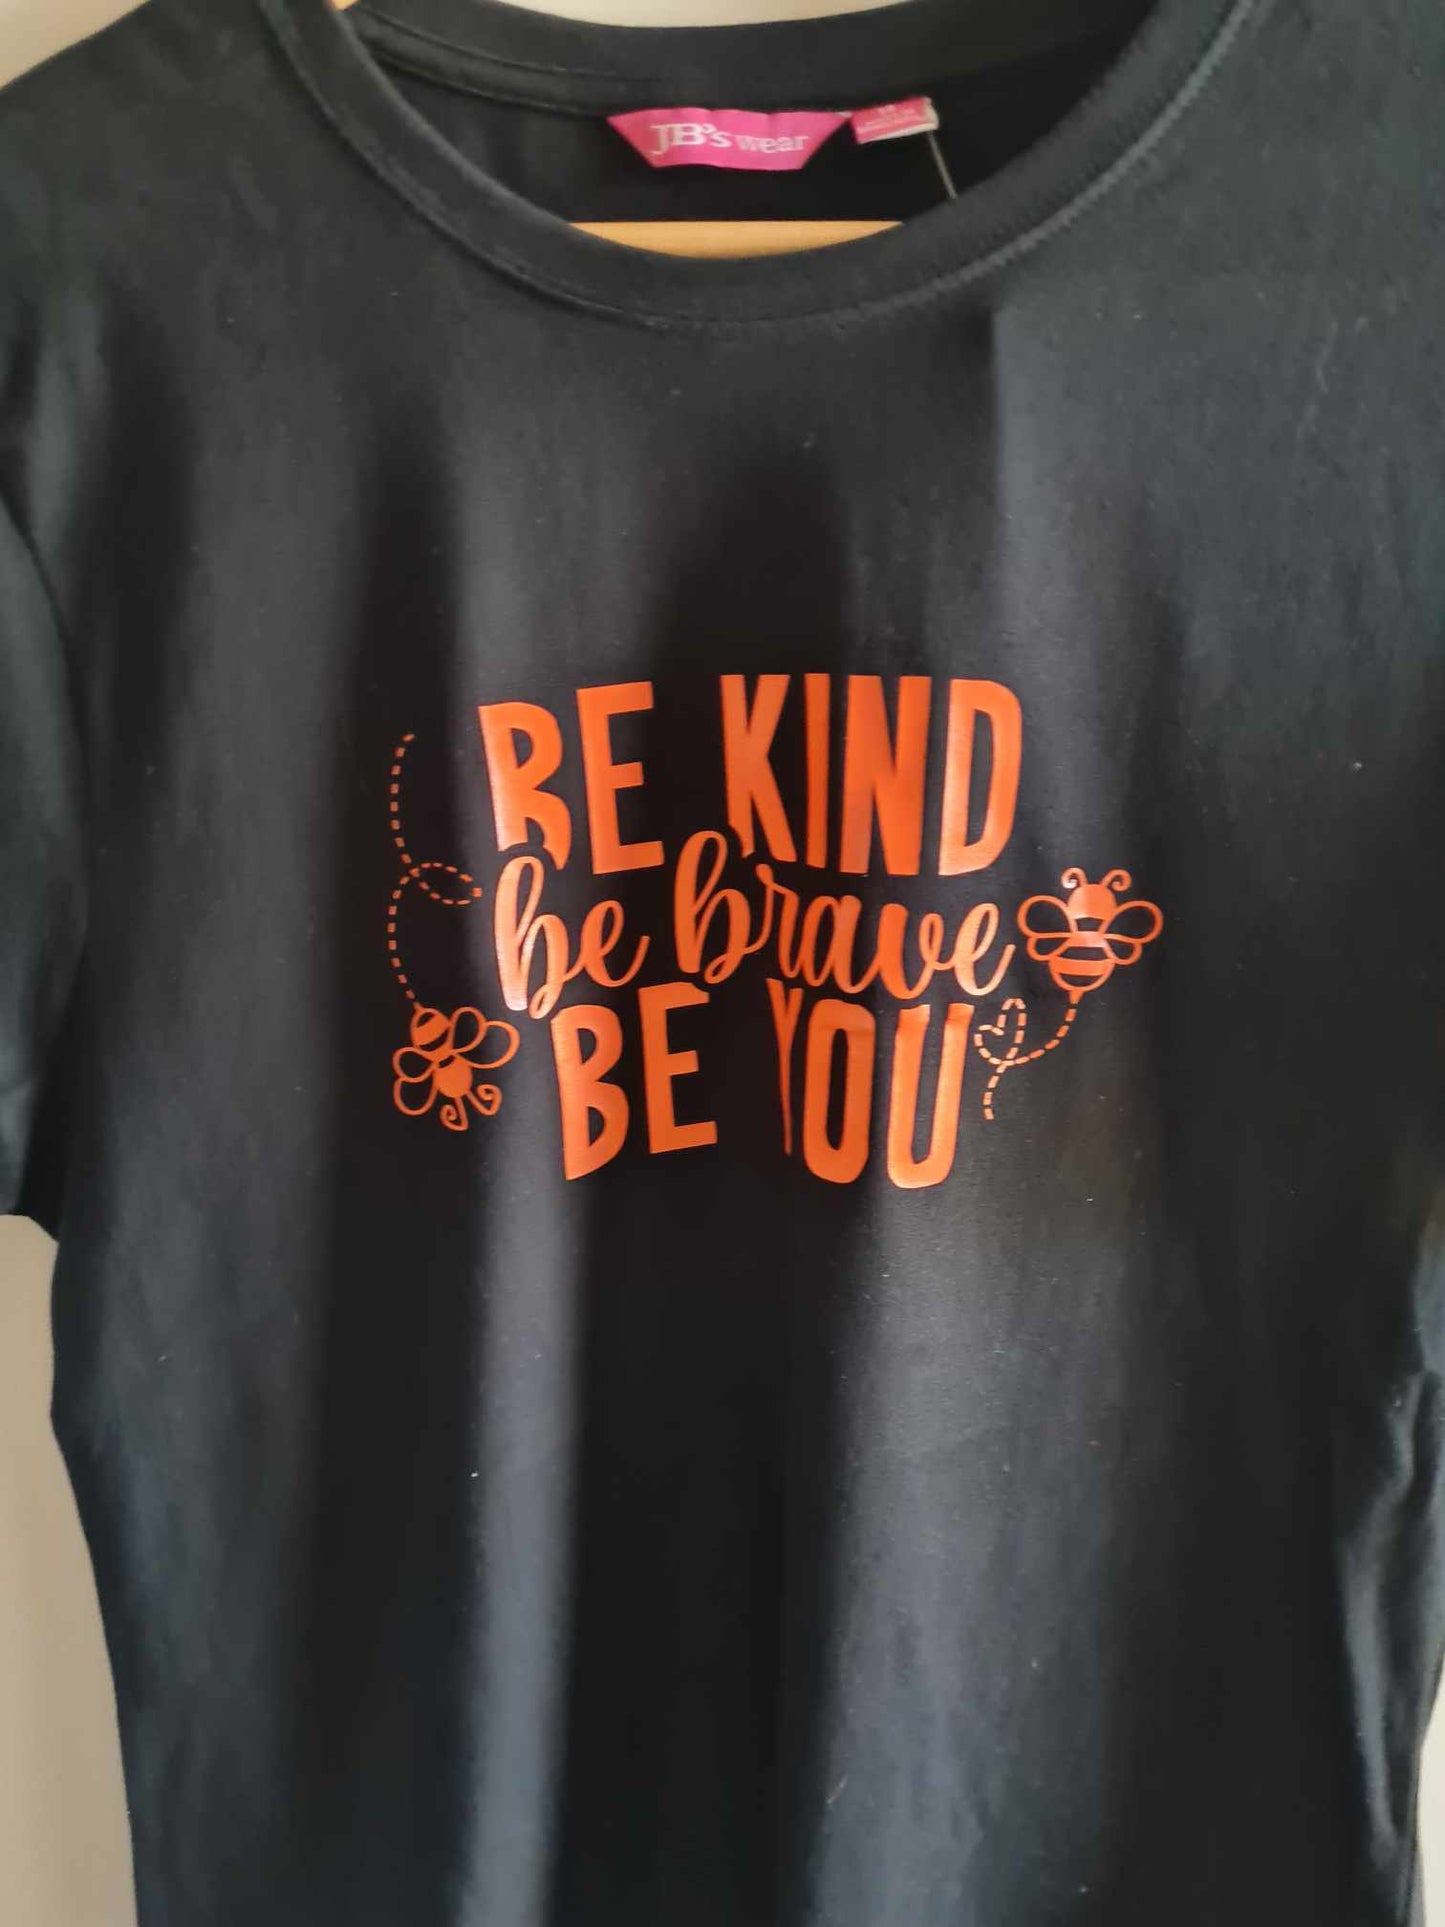 Adults Harmony Day Shirt - Be Kind Be Brave Be You